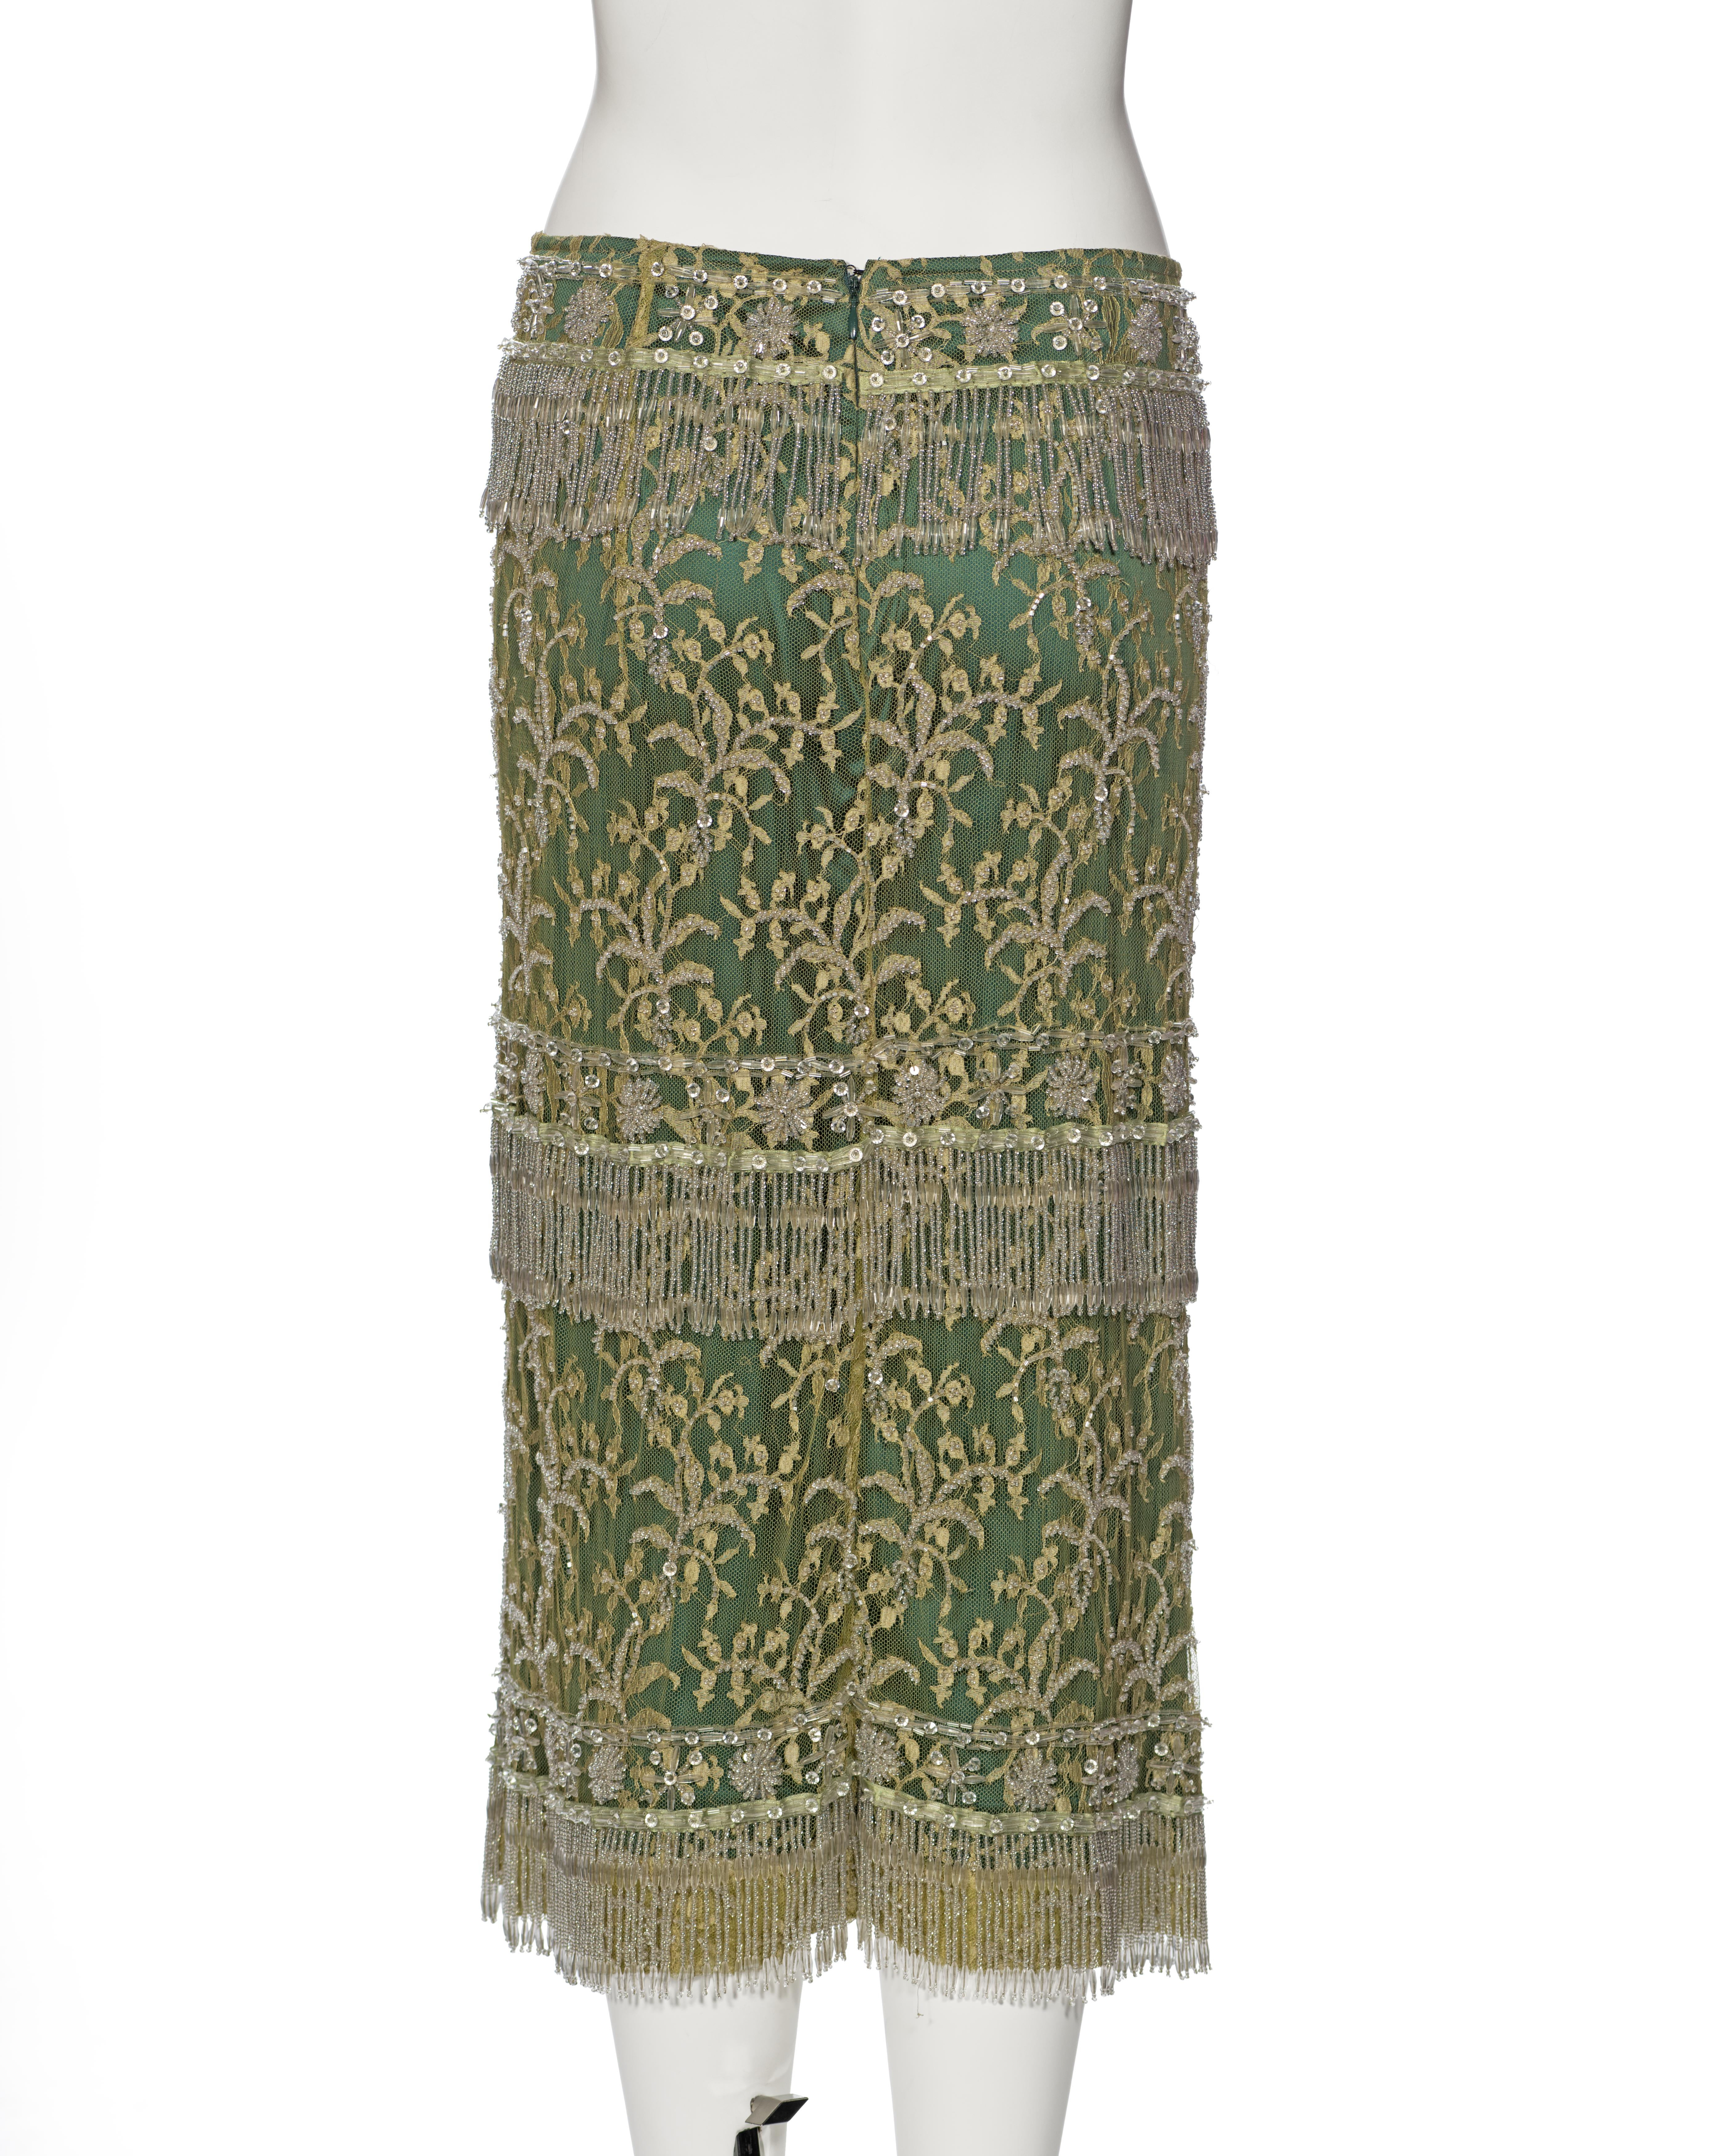 Dolce & Gabbana Beaded Chartreuse Lace Evening Skirt, ss 2000 For Sale 3